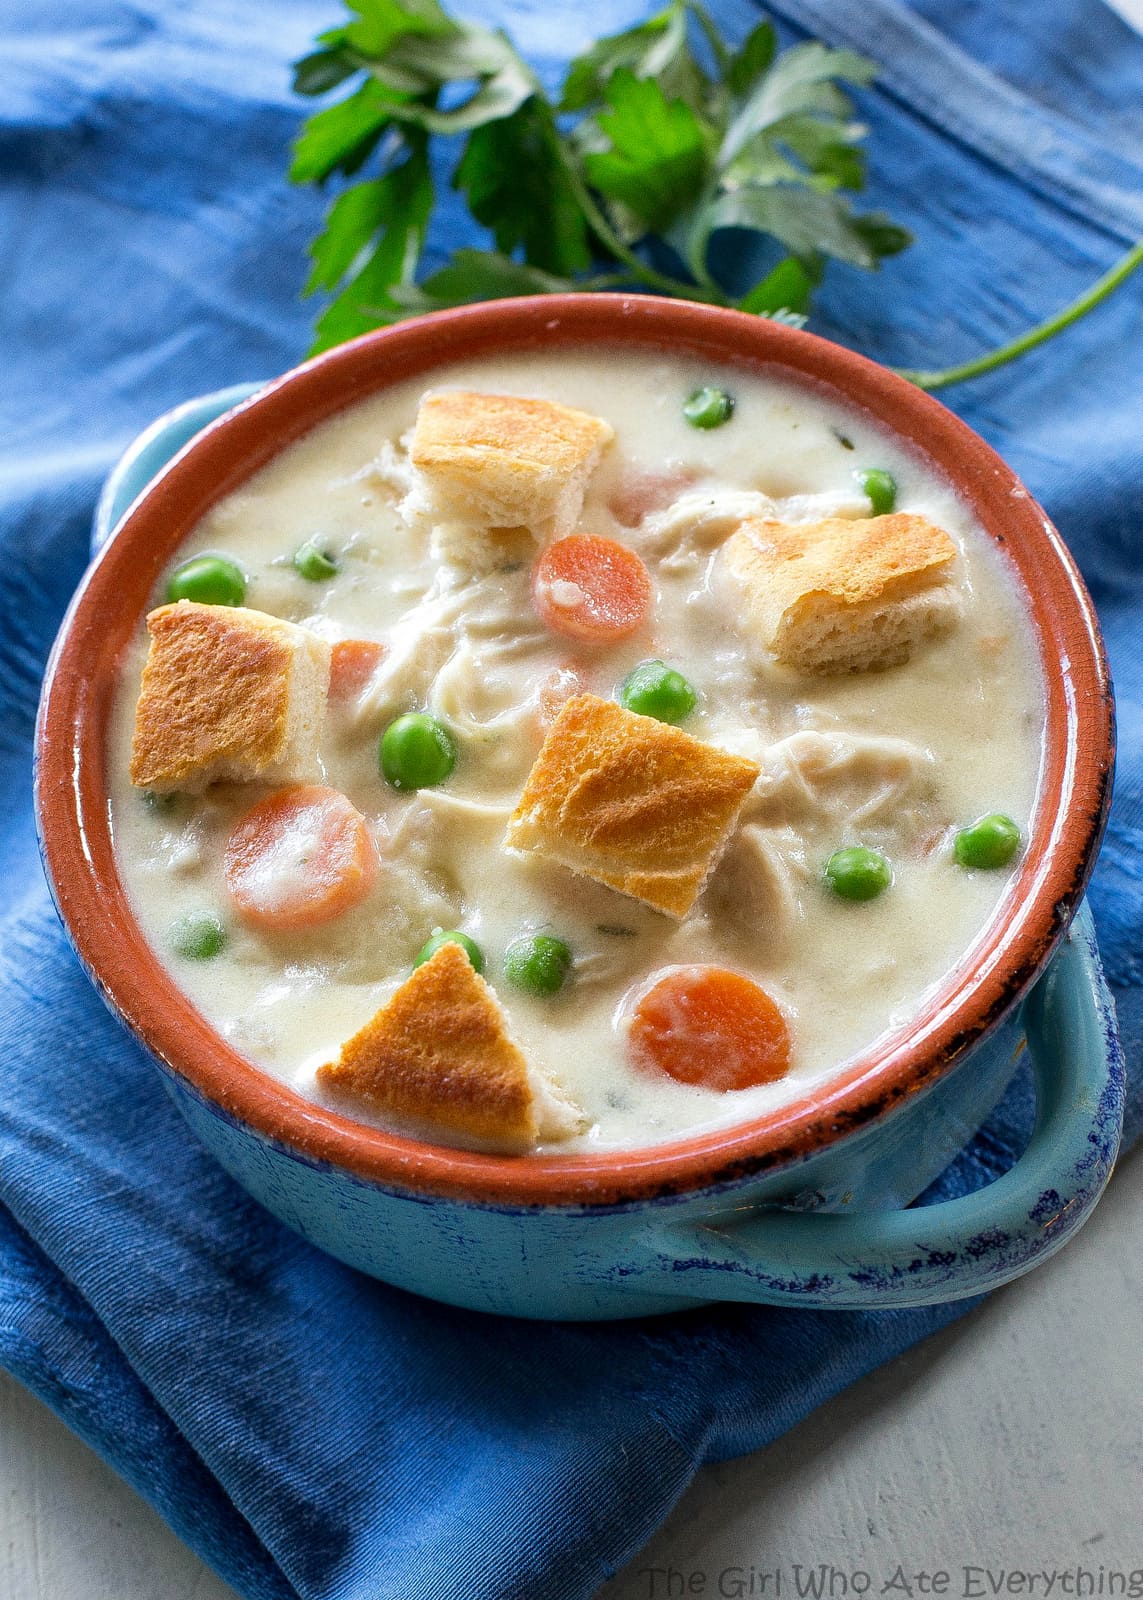 Chicken Pot Pie Soup - creamy pot pie soup with carrots, peas and potatoes. Seasoned to perfection! the-girl-who-ate-everything.com